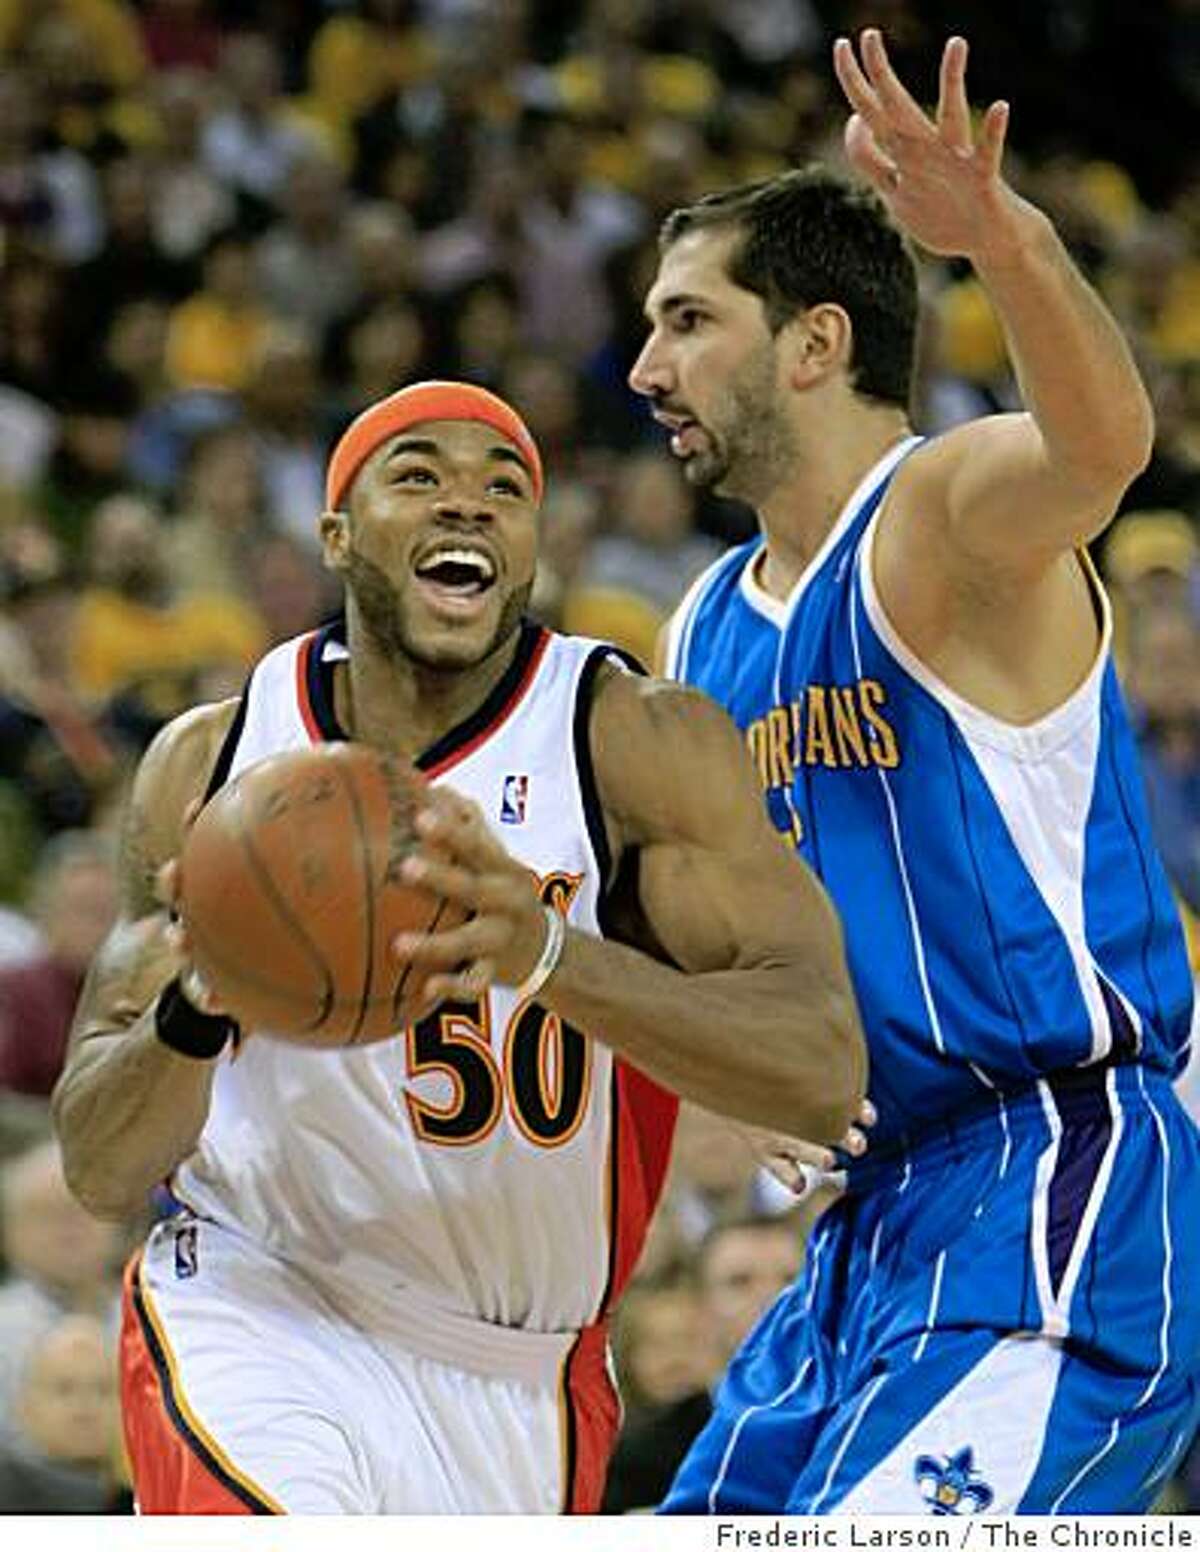 Corey Maggette (50) Golden State Warriors runs pass Peja Stojakovic (16) of the New Orleans Hornets in the first quarter of action at the Oracle Arena in Oakland Calif., on Wednesday October 29, 2008.